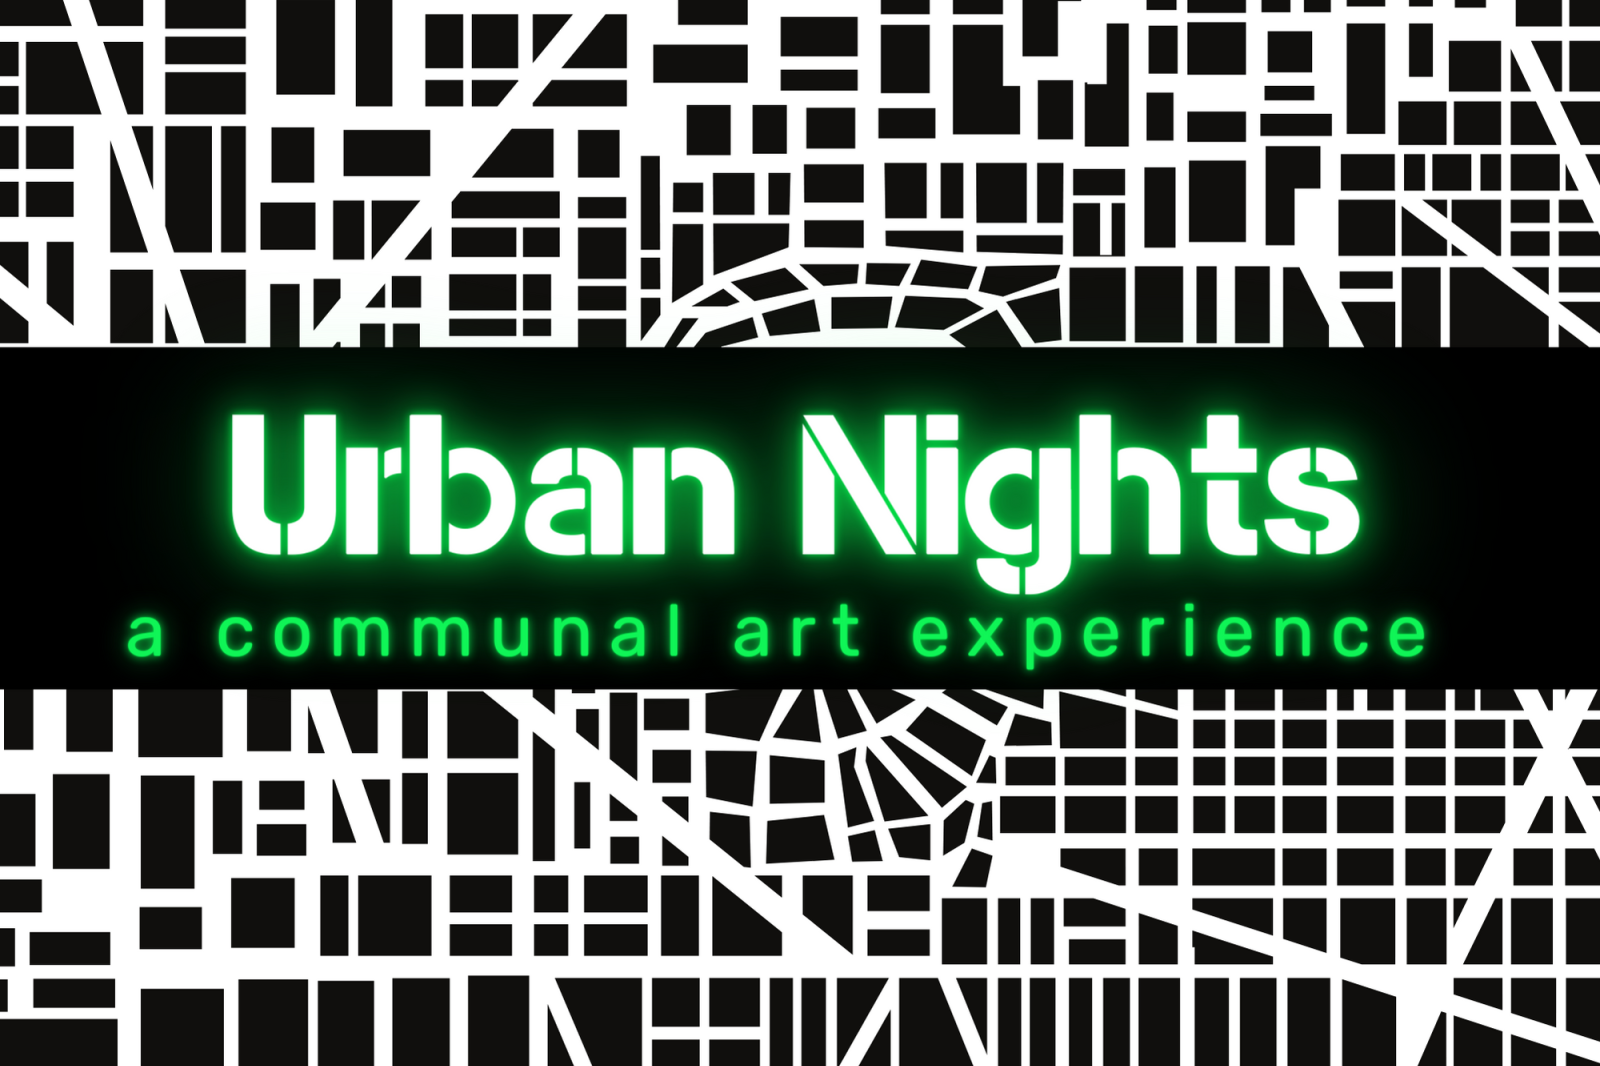 Promotional Image for Urban Nights with graphic map and text.